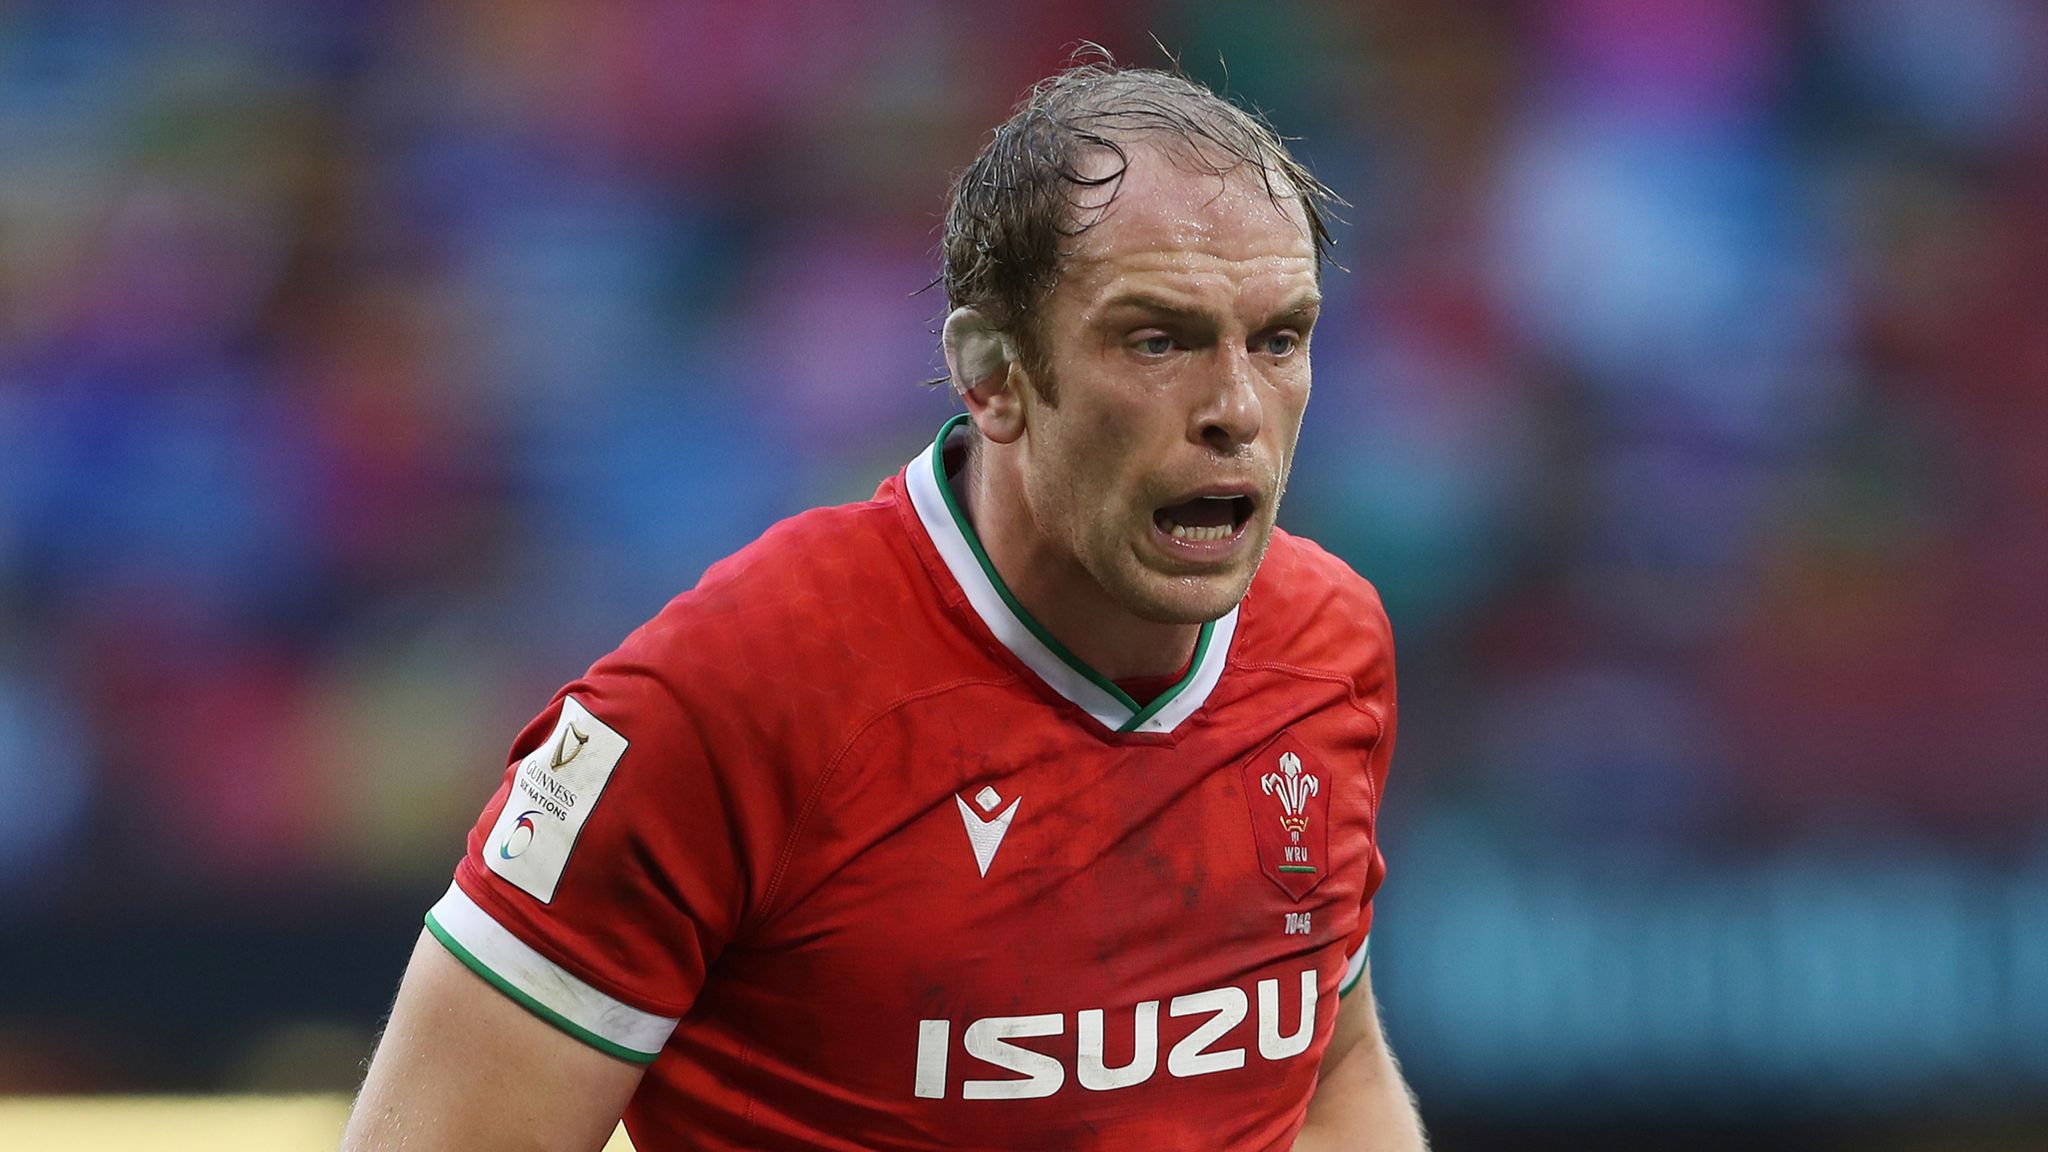 Alun Wyn Jones confirmed as British and Irish Lions captain for 2021 Test  series vs South Africa | Rugby Union News | Sky Sports